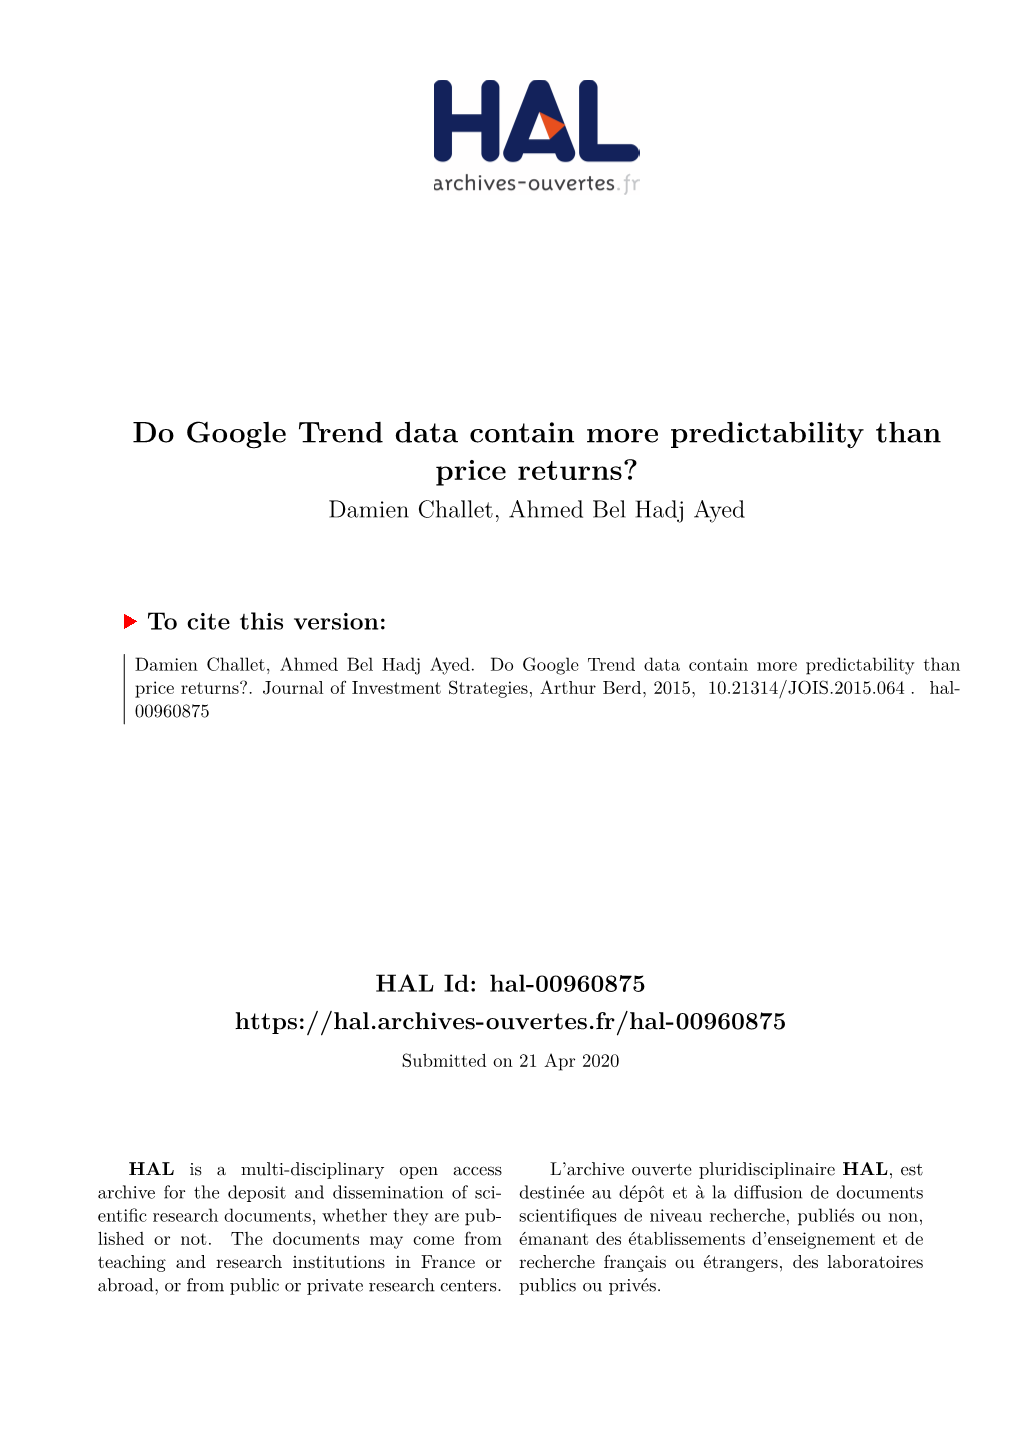 Do Google Trend Data Contain More Predictability Than Price Returns? Damien Challet, Ahmed Bel Hadj Ayed